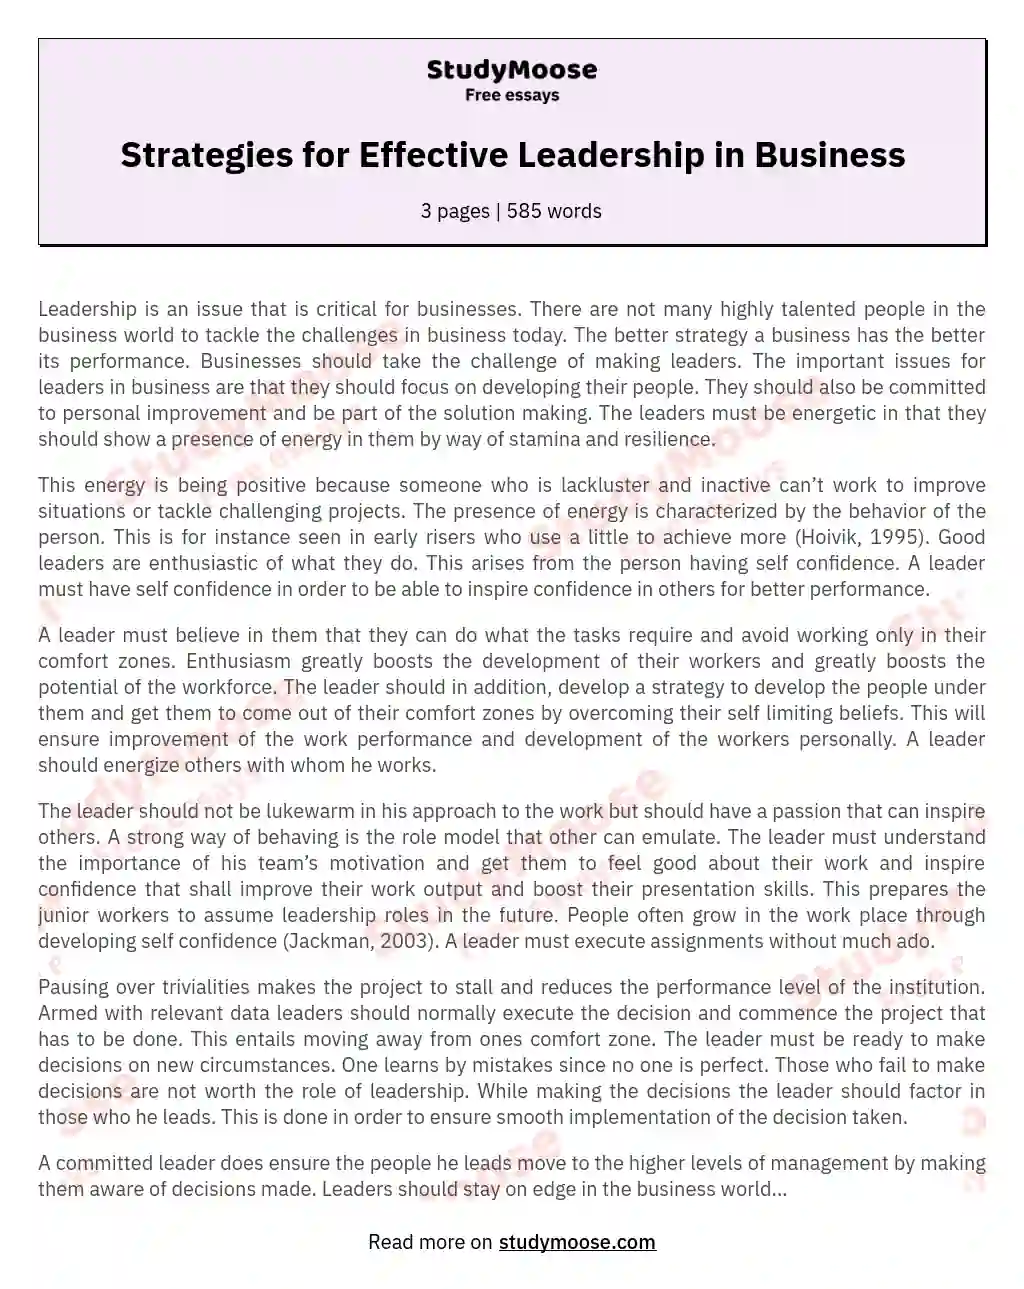 Strategies for Effective Leadership in Business essay